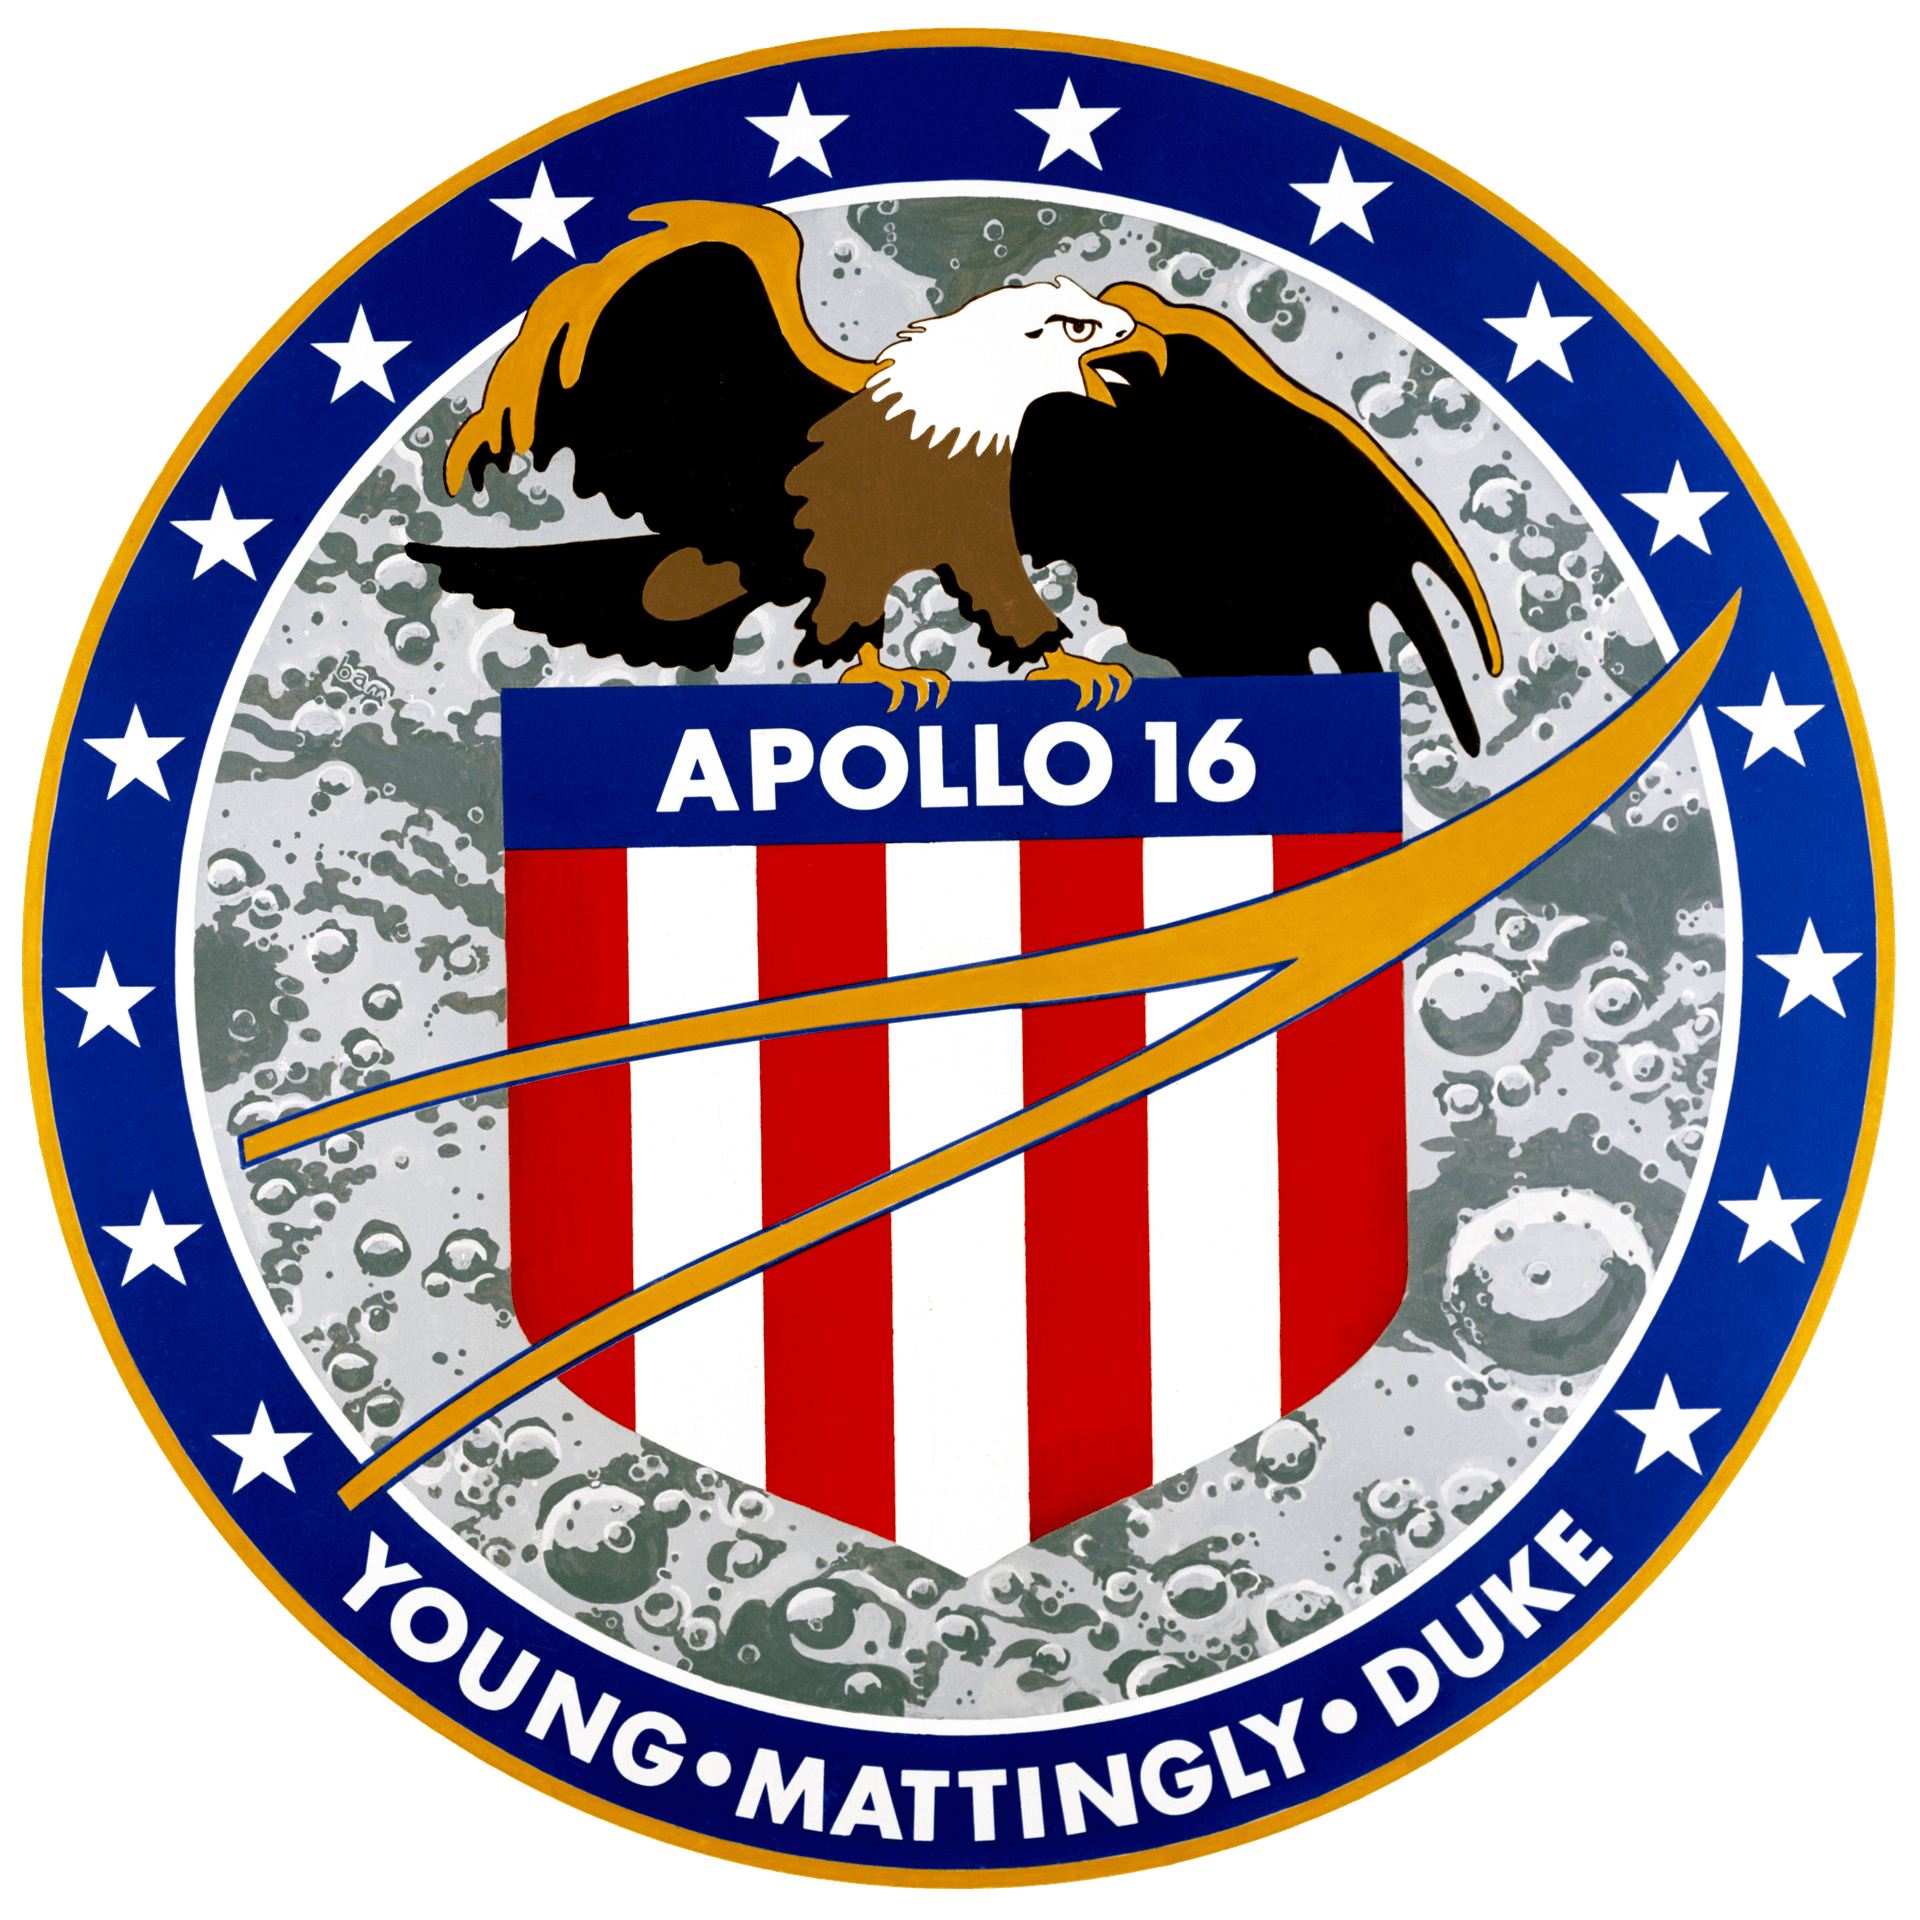 Mission patch for Apollo 16